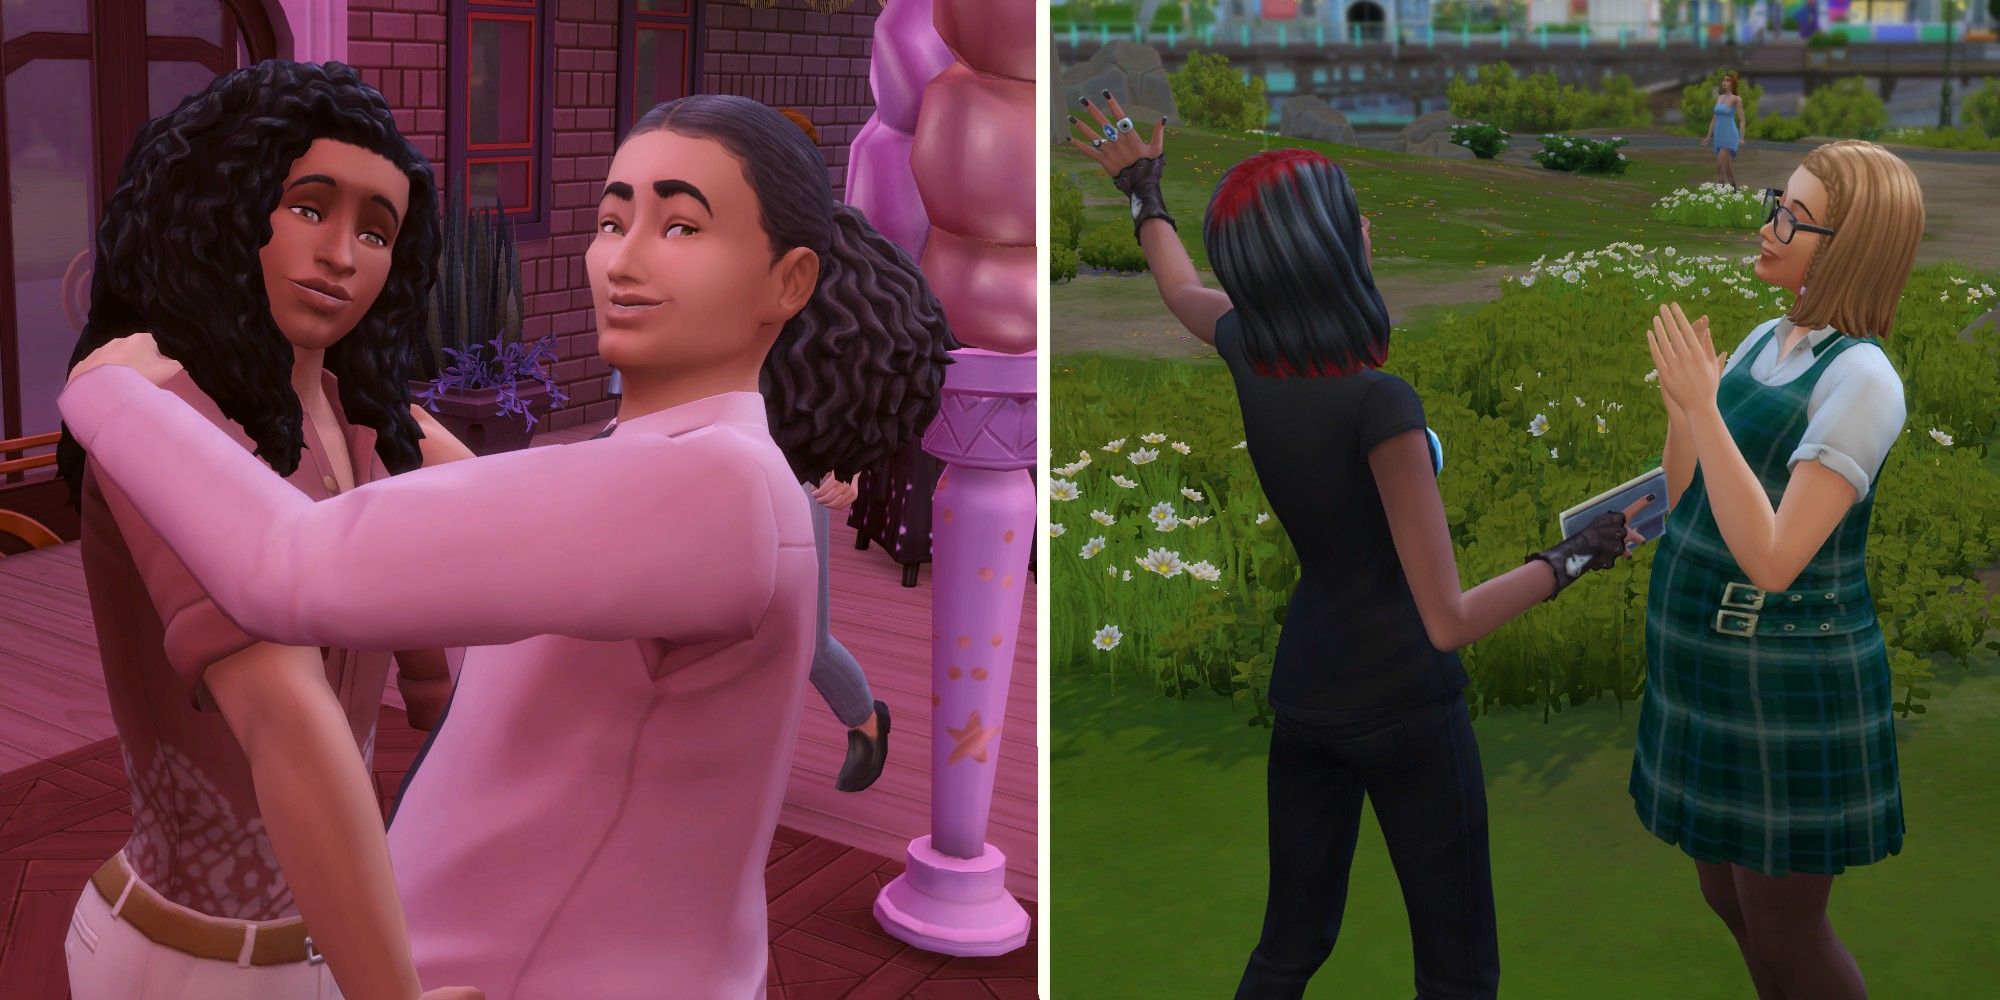 The Sims 4 will have an update where you can now have transgender